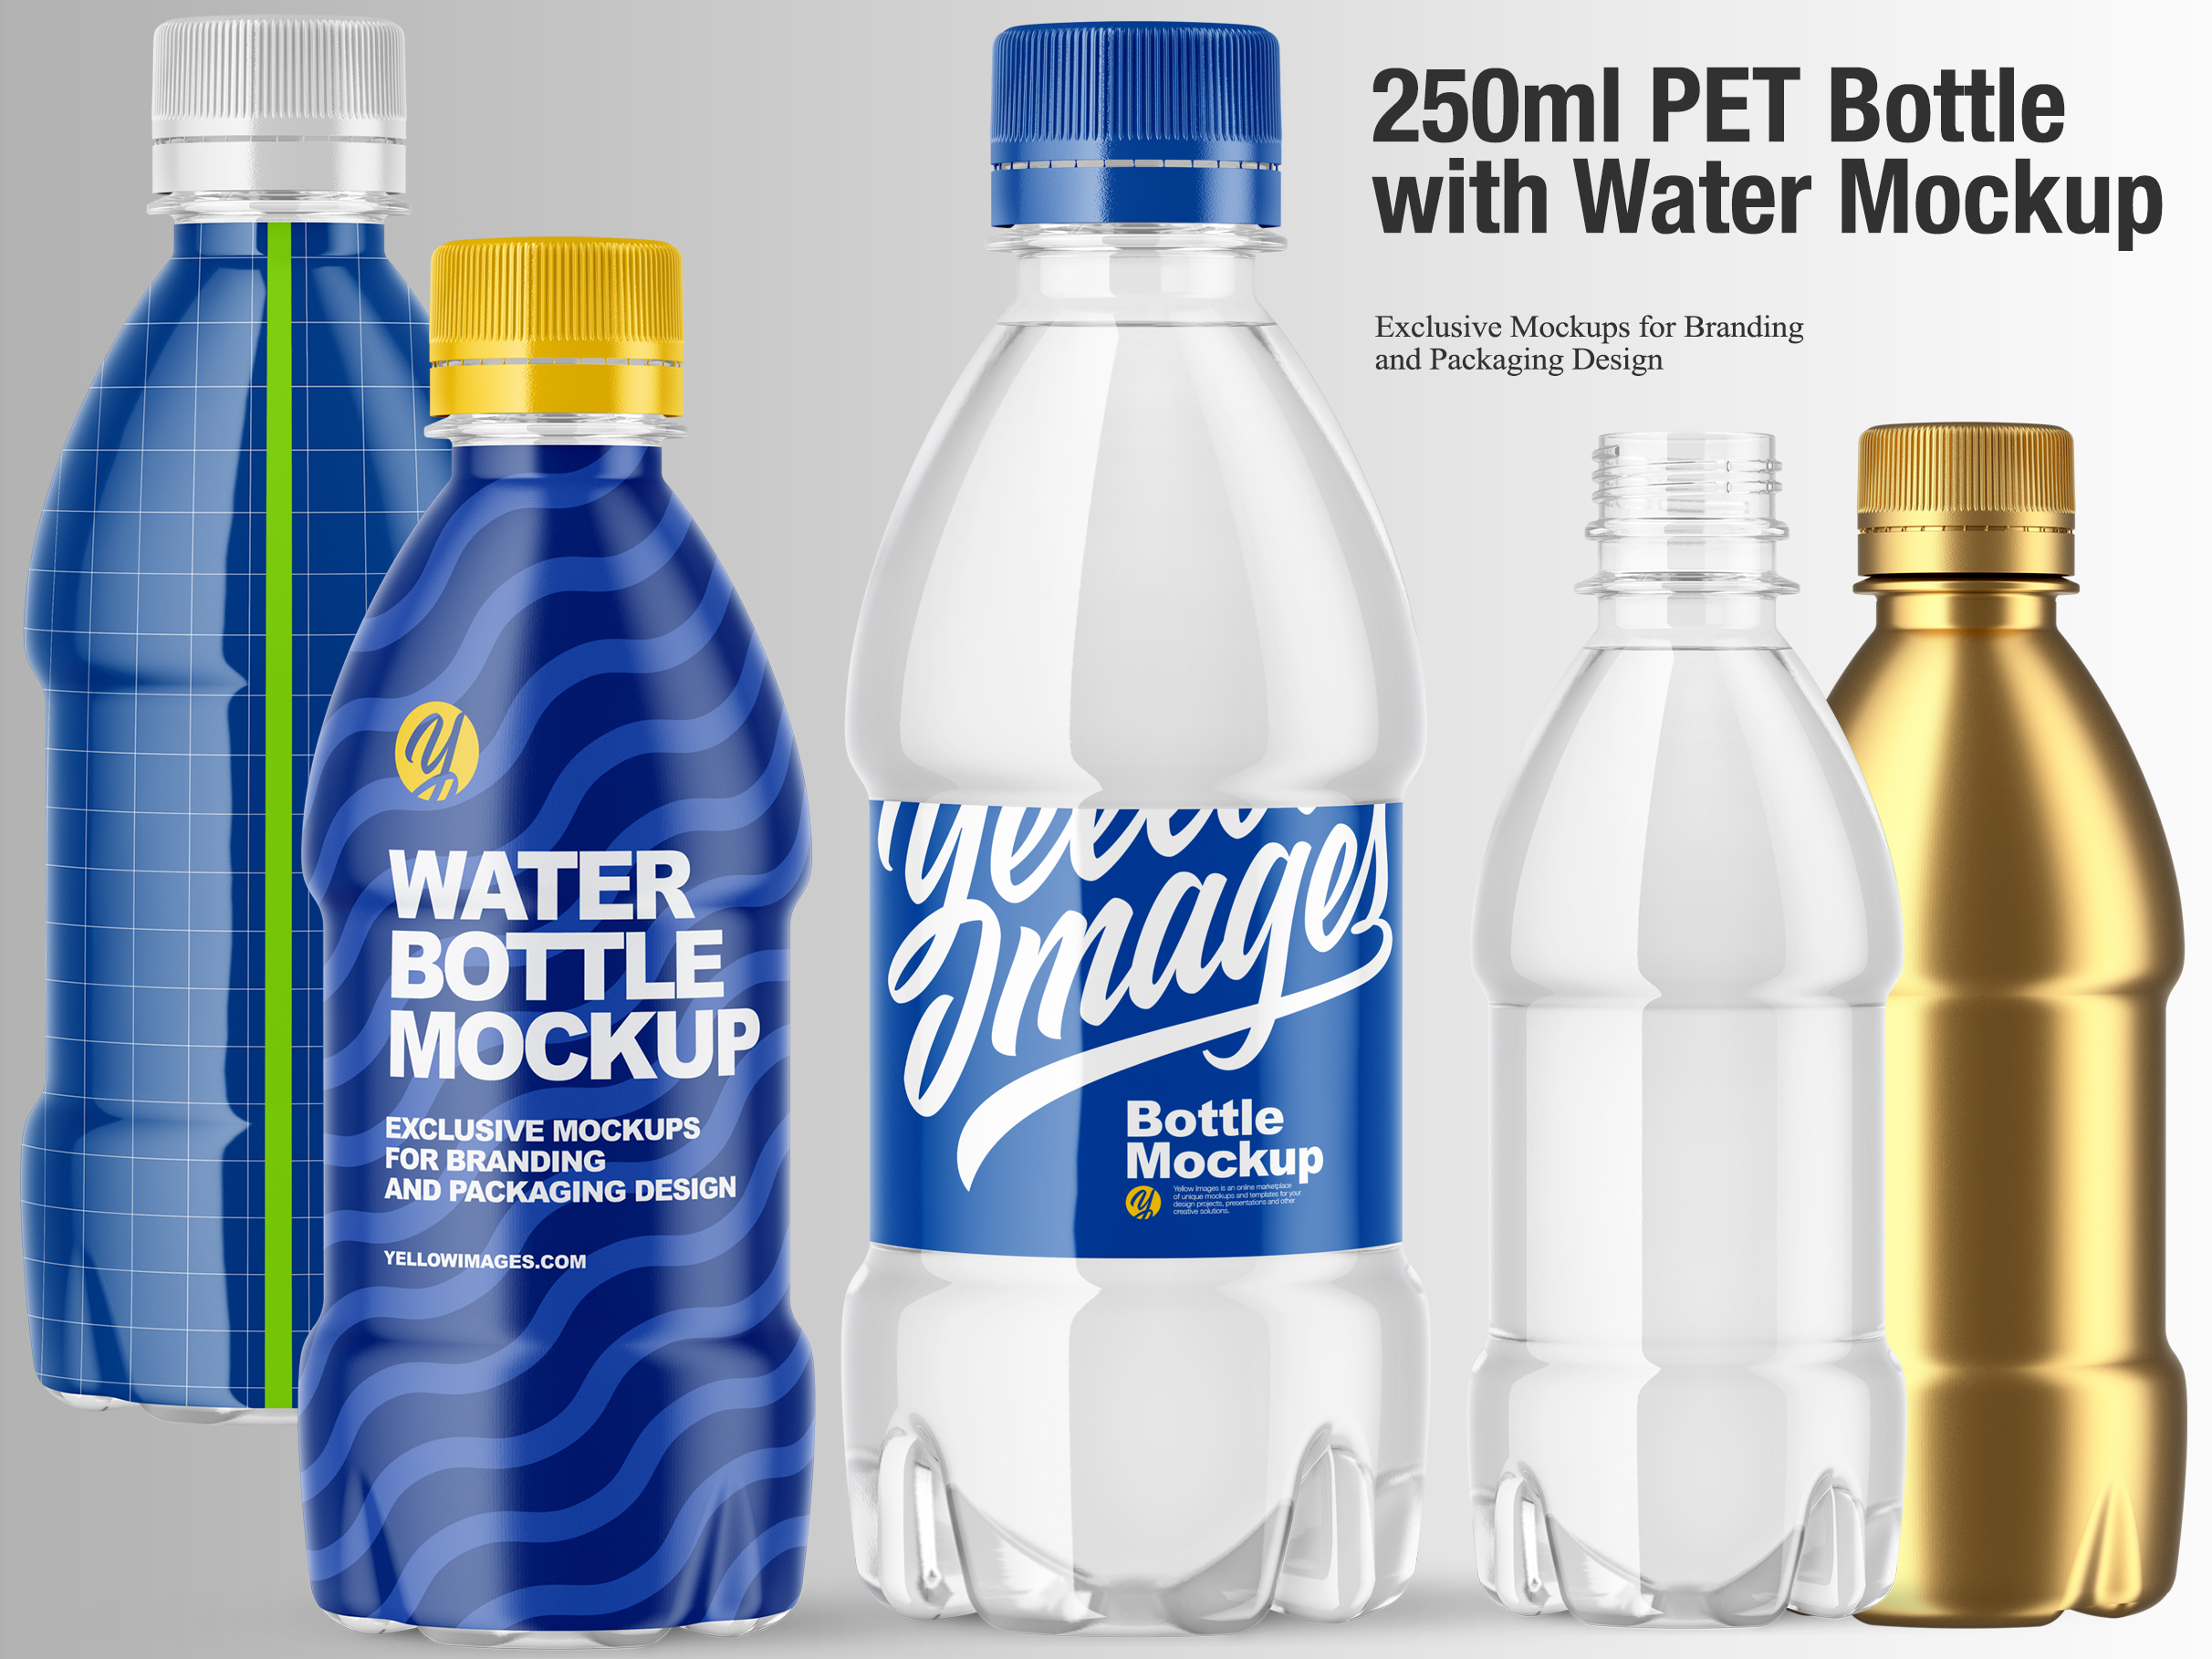 Water Bottle Packaging Mockup Download Free And Premium Psd Mockup Templates And Design Assets